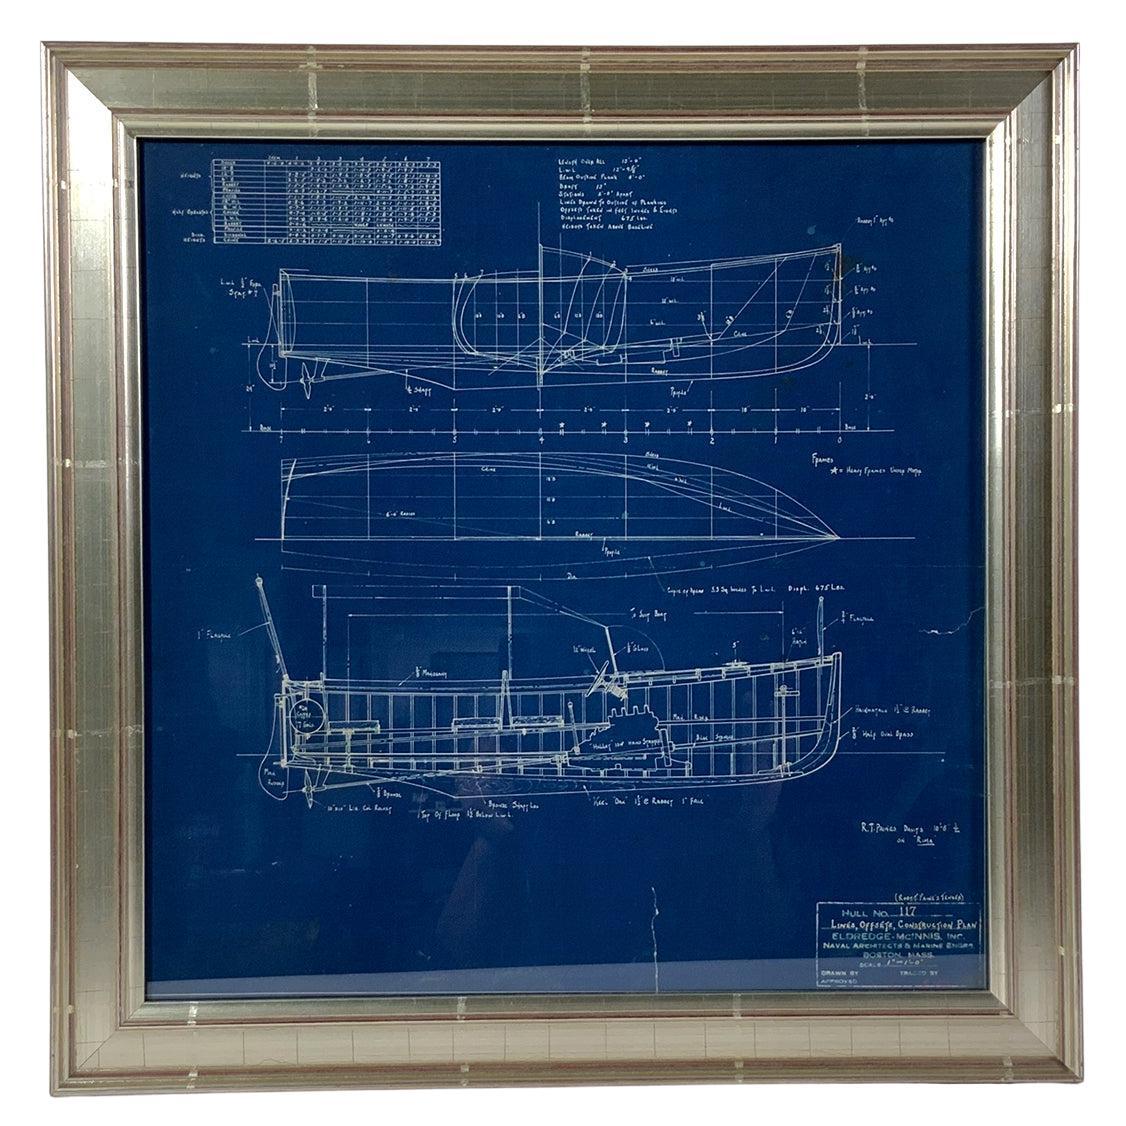 Charming Original Blueprint for Yacht Tender Onboard Yacht Rima For Sale